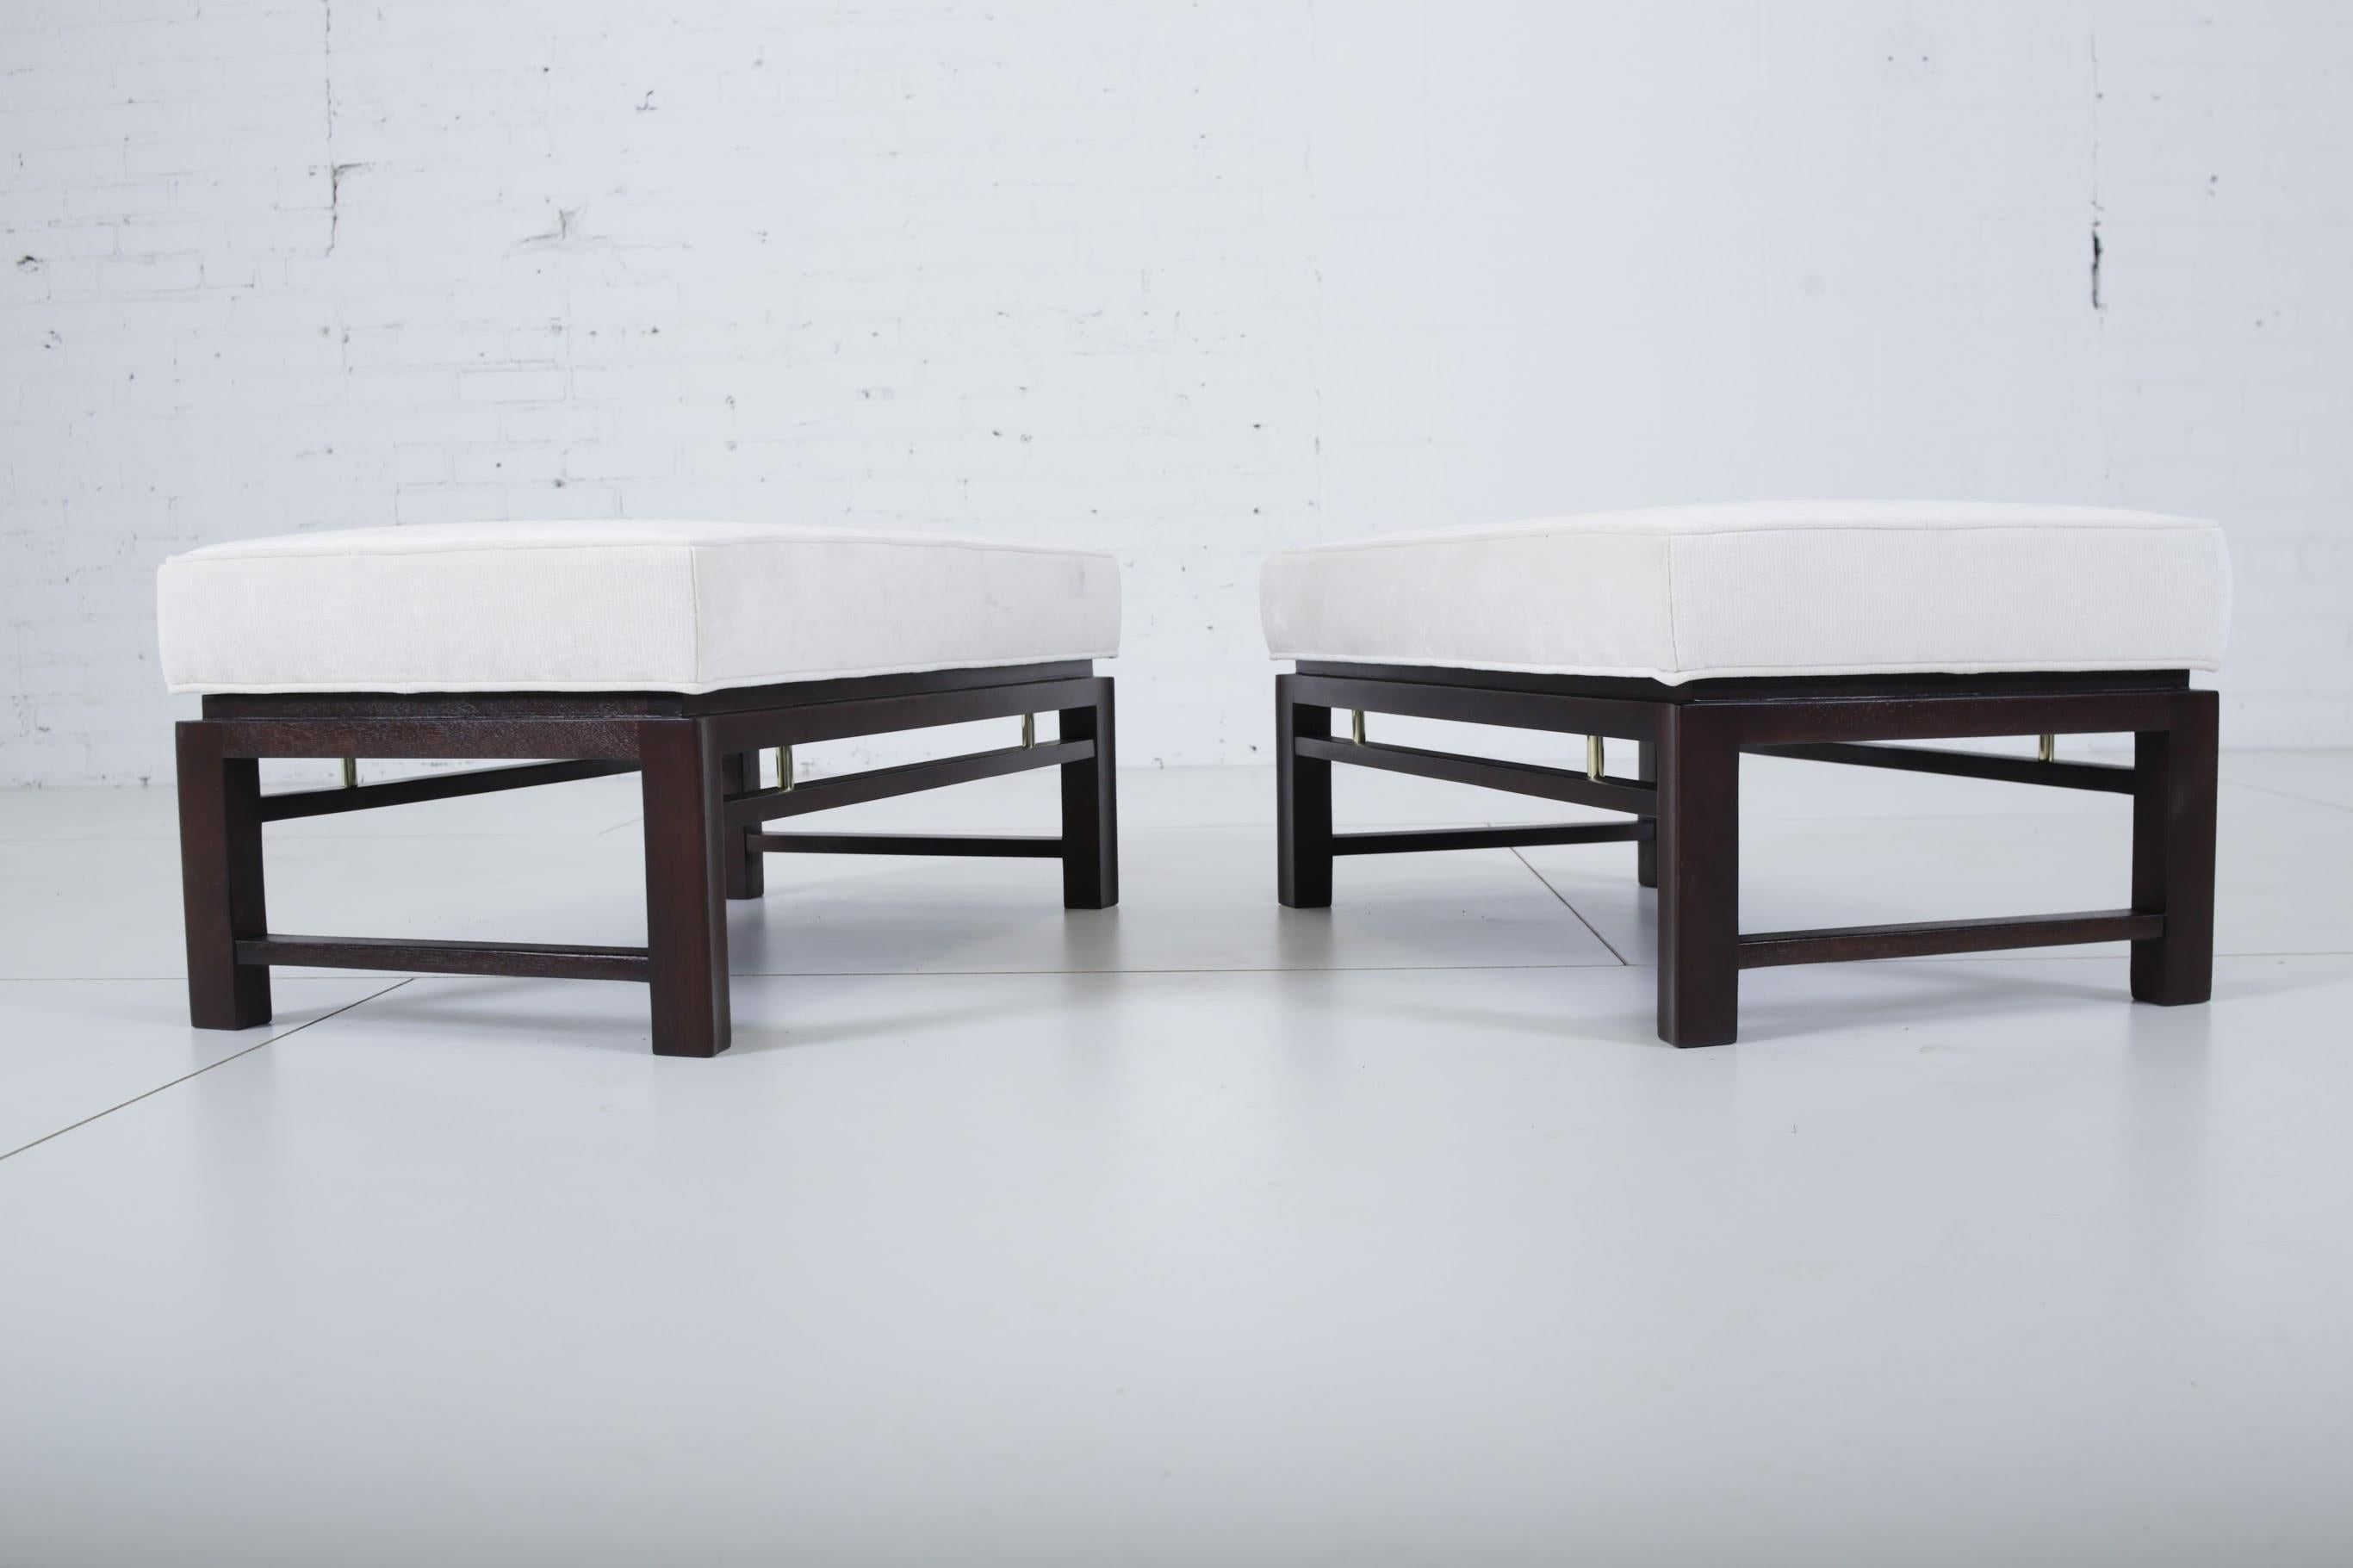 Pair of benches by Edward Wormley for Dunbar. Fully restored mahogany bases with brass accents and new upholstery.